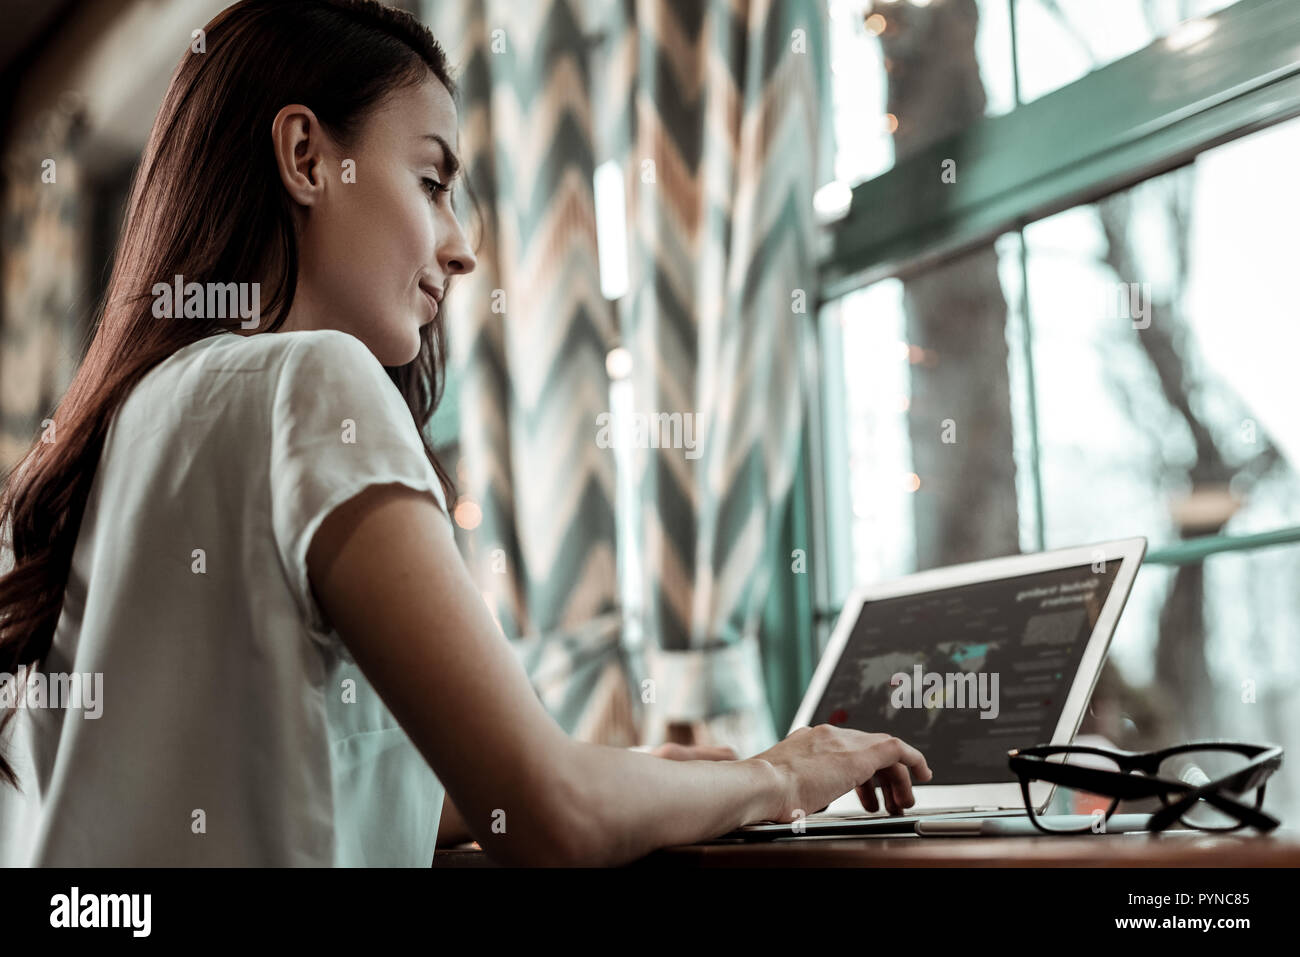 Concentrated female person looking at screen of her laptop Stock Photo